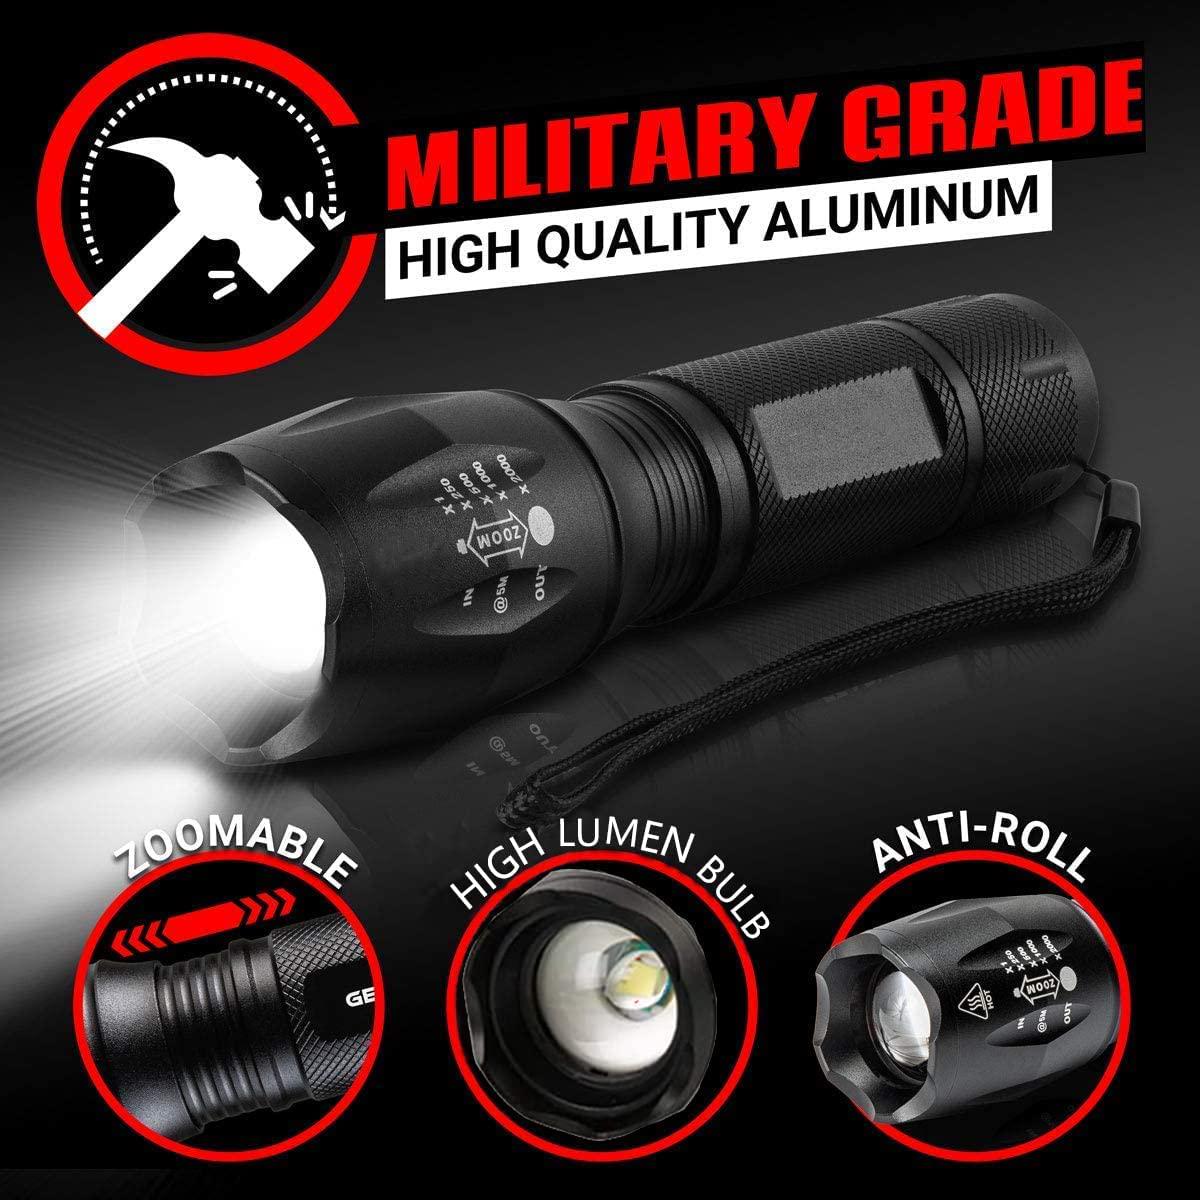 Dopssie, LED Torches, 800 Lumen Ultra Bright LED Tactical Flashlight with 5 Modes, Zoomable, Waterproof, Handheld Small Flashlight for Outdoor Camping, Emergency, and Hunting Included 1200mAh Rechargeable Battery